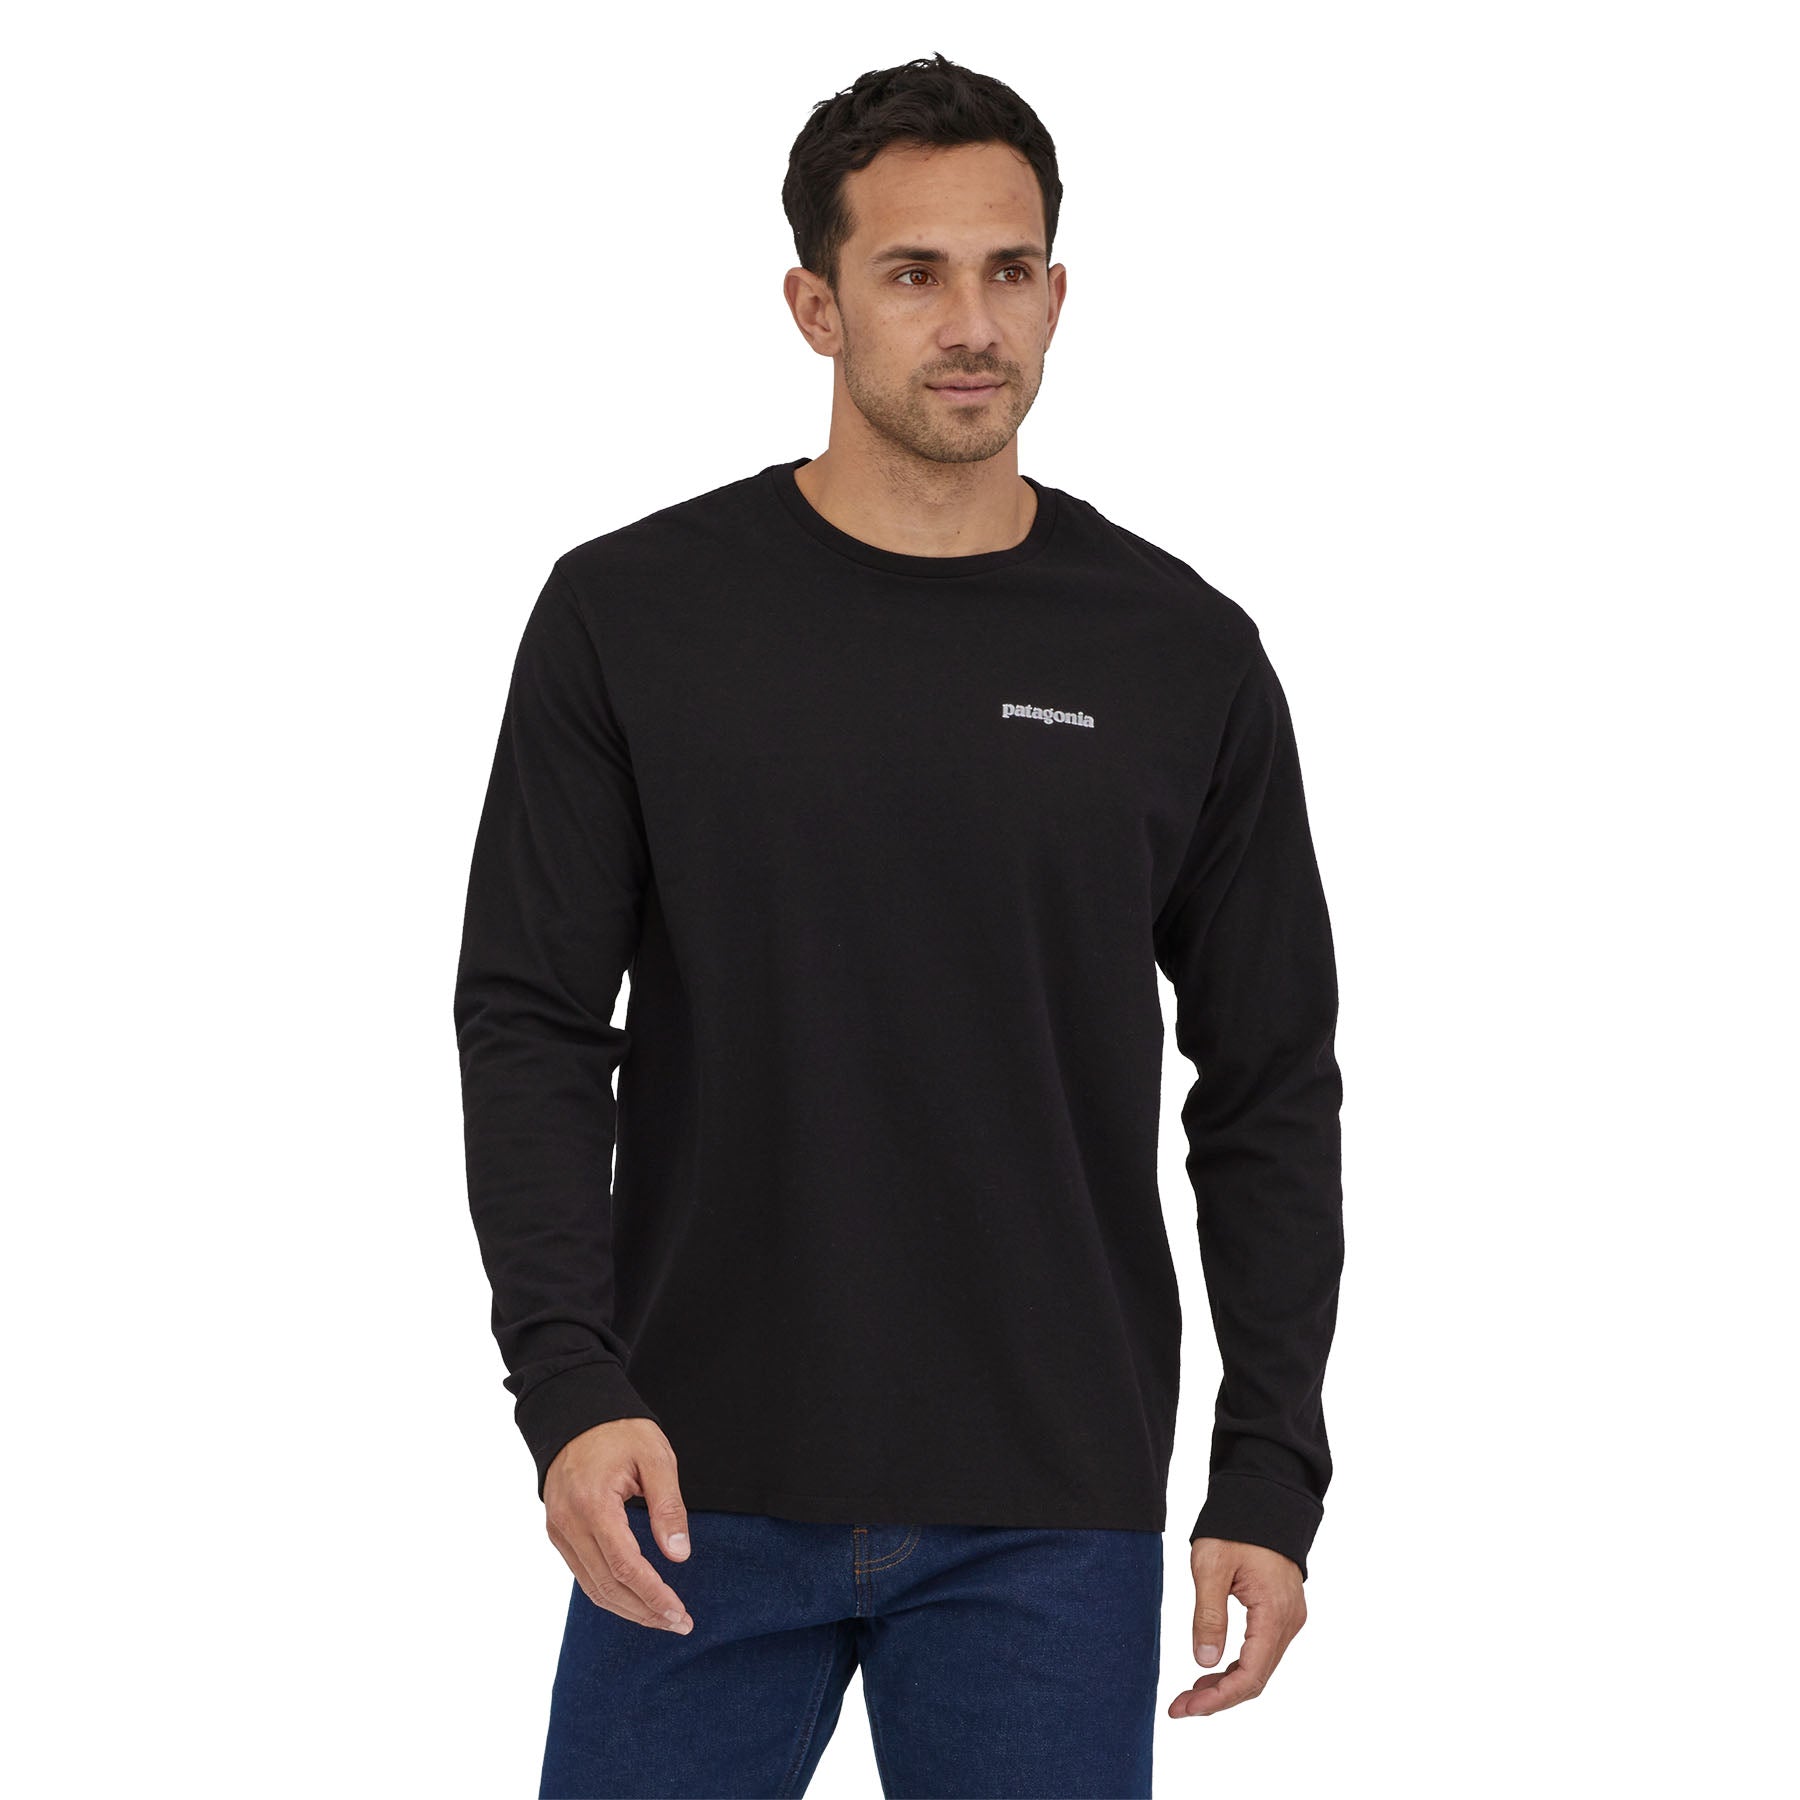 M's Long-Sleeved Home Water Trout Responsibili-Tee